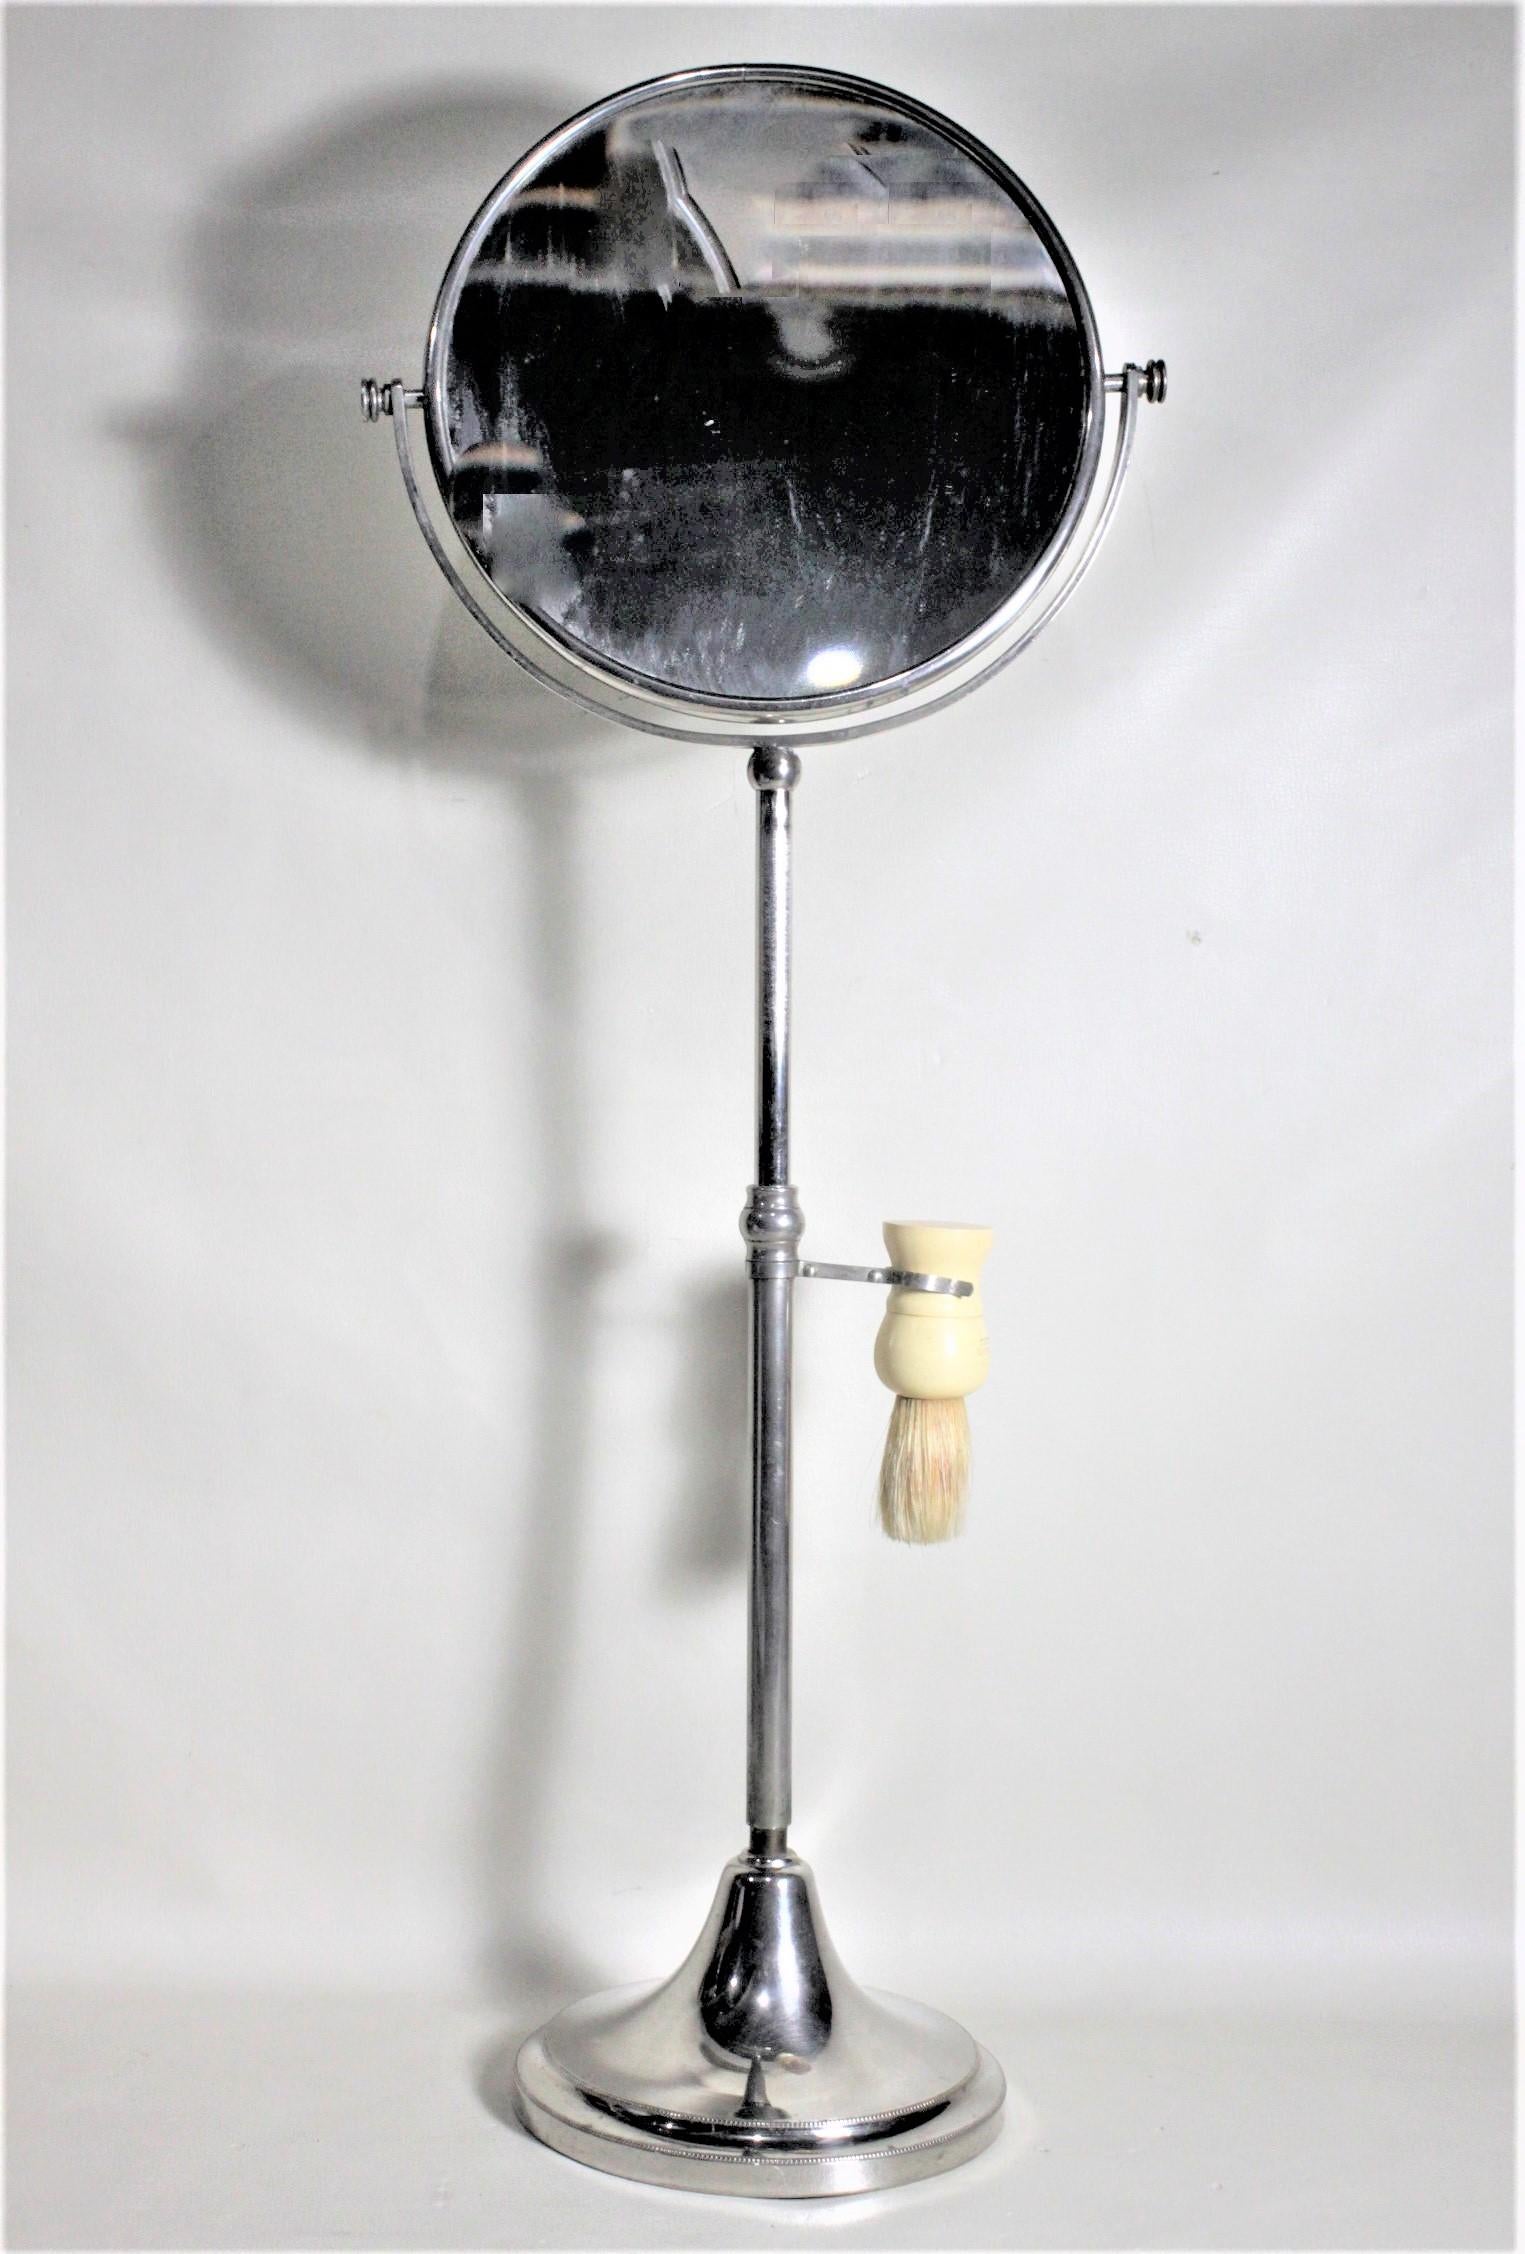 This chrome or nickel-plated pedestal shaving stand is unsigned, but presumed to have been made in the United States in the 1930s in the Art Deco style. The stand is well constructed and sturdy and has a screw down adjustment in the middle to allow